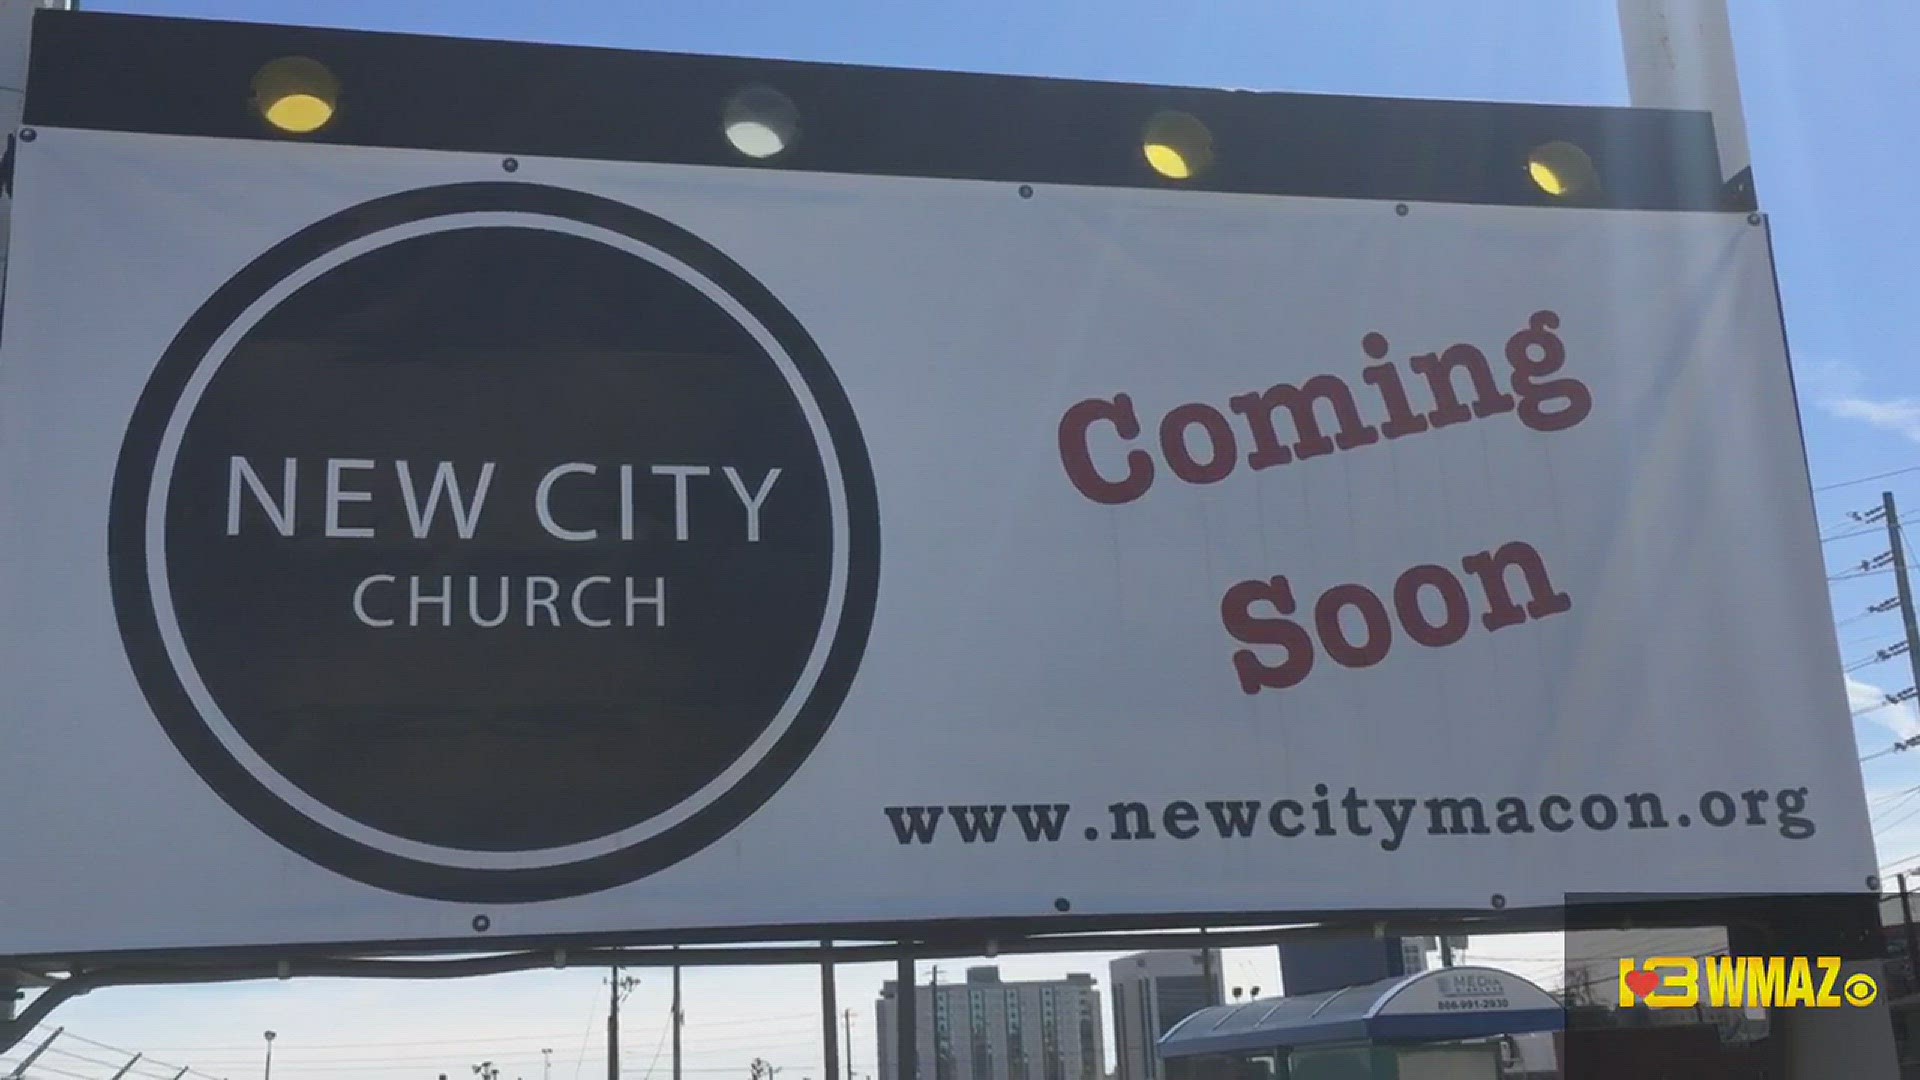 New City Church opened in the former Power Station nightclub on Riverside Drive in Macon.